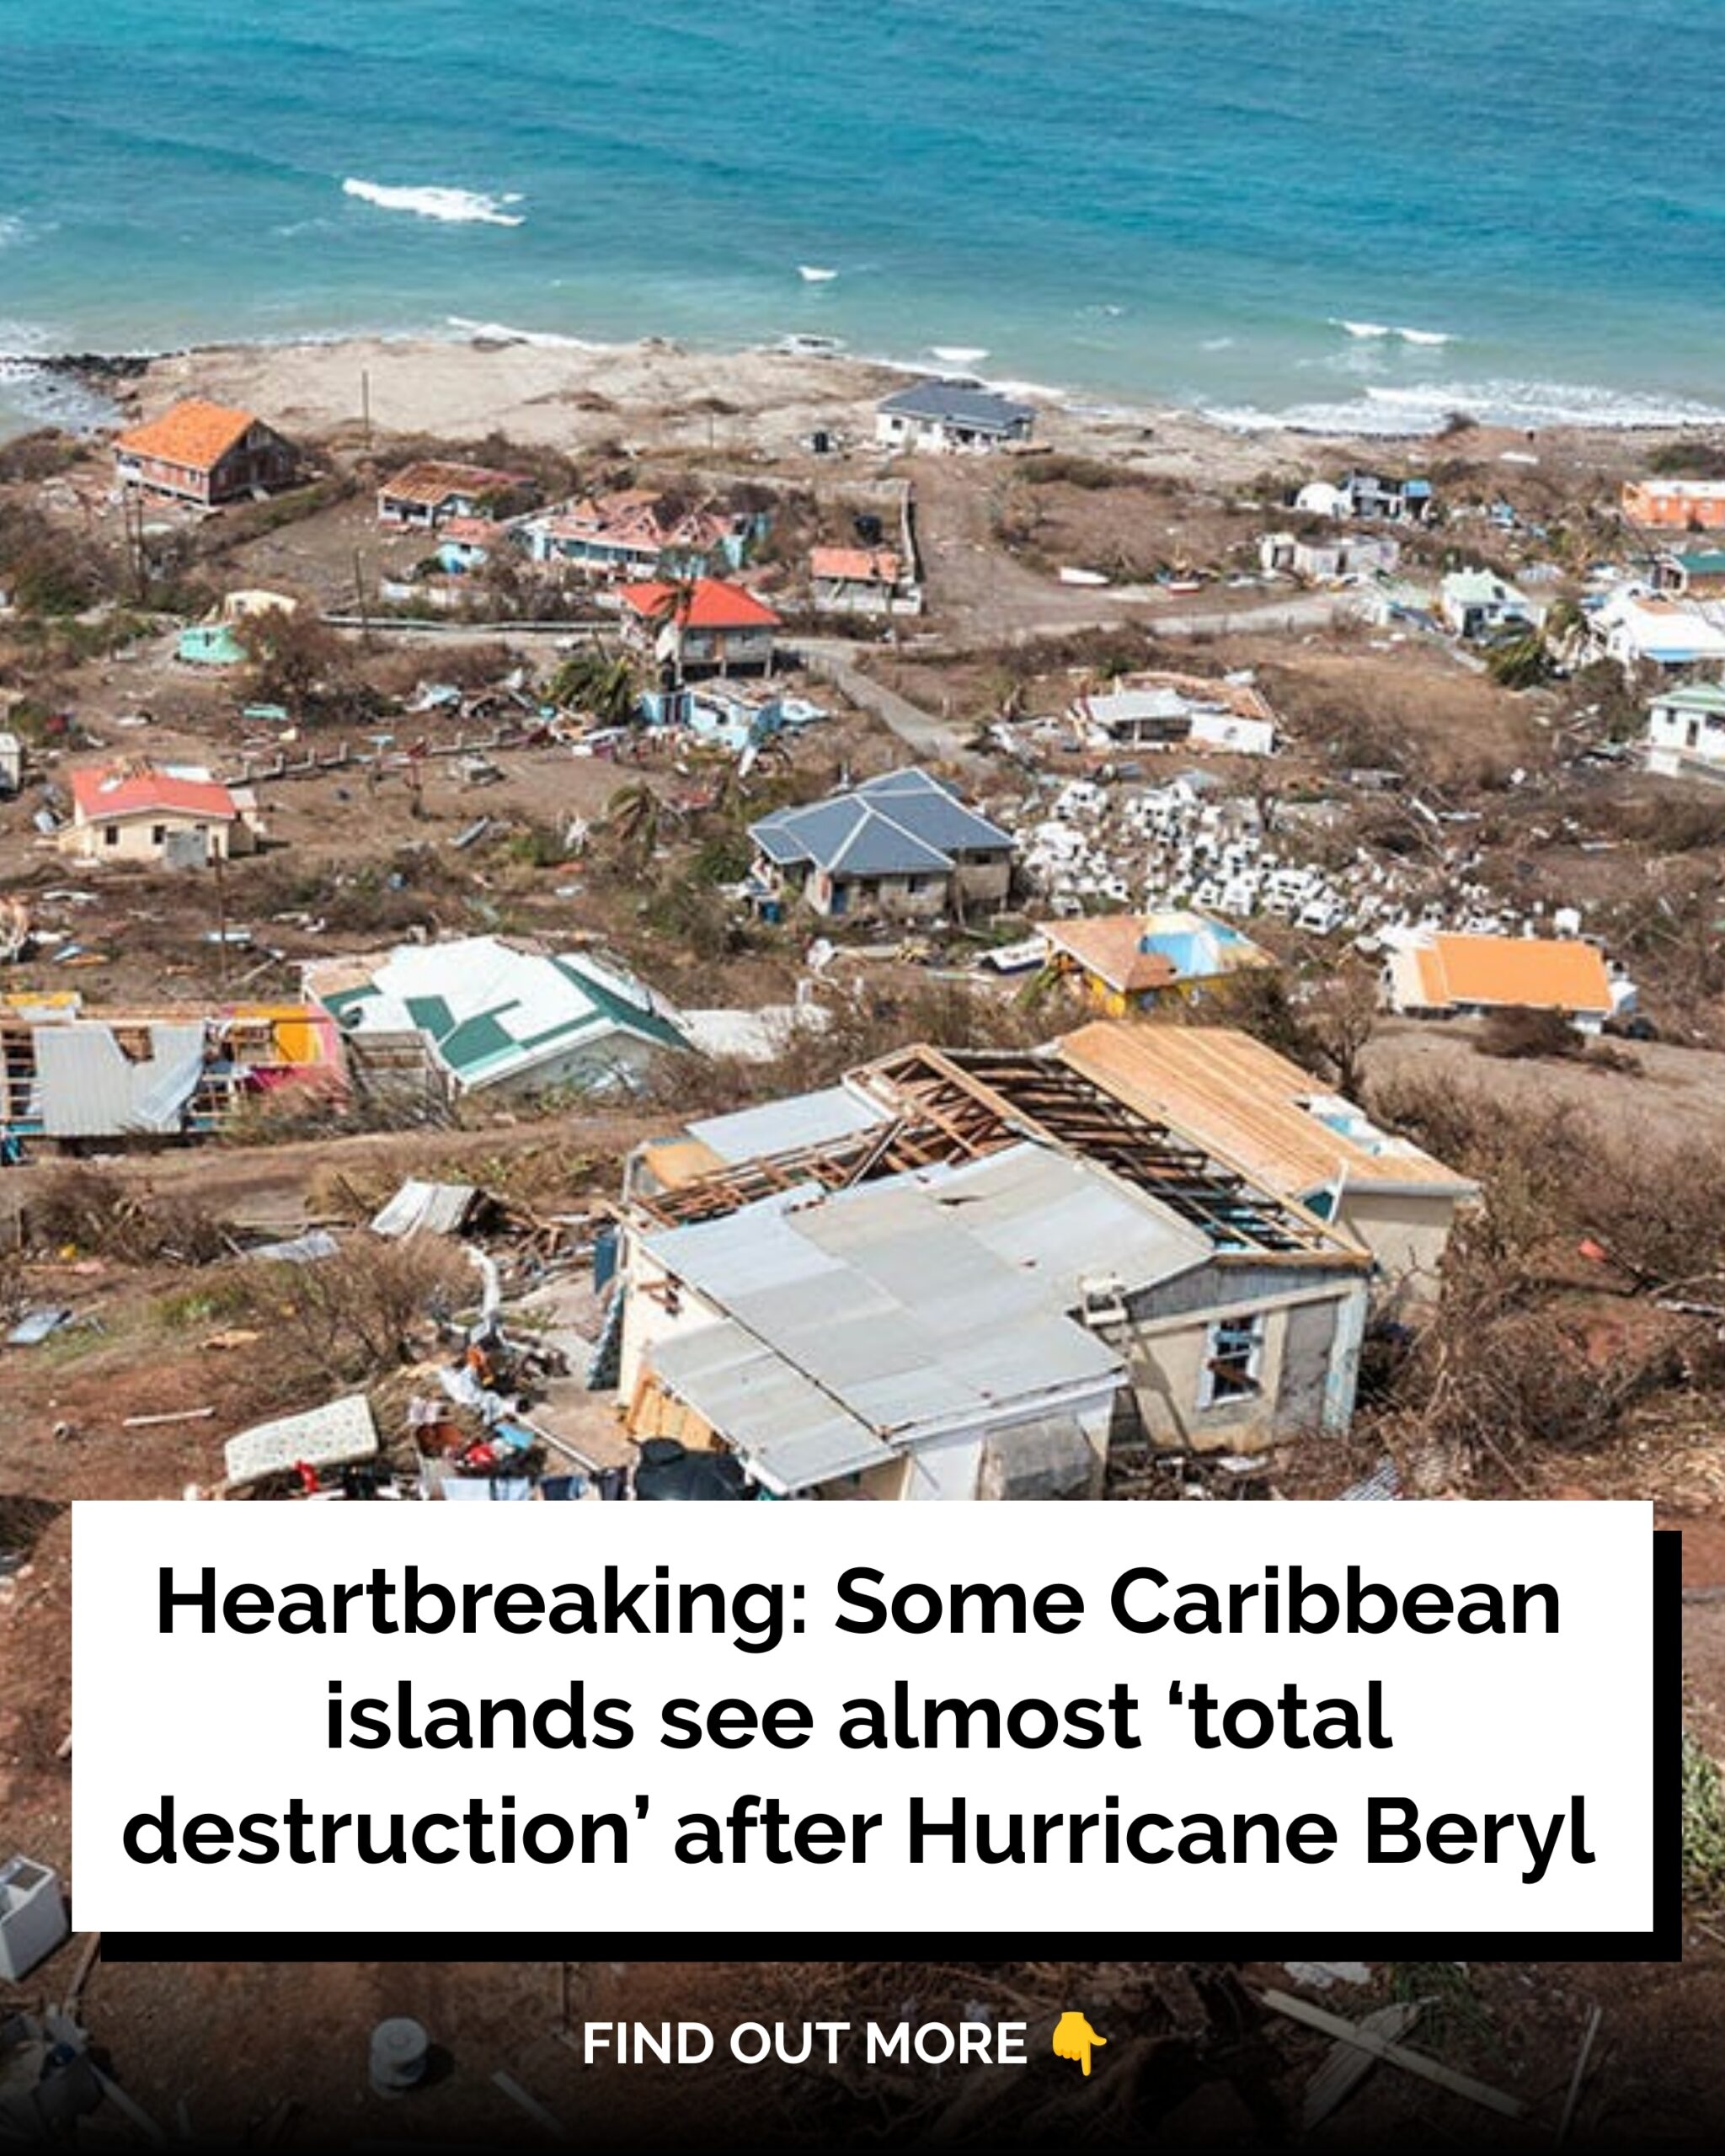 Some Caribbean islands see almost ‘total destruction’ after Hurricane Beryl